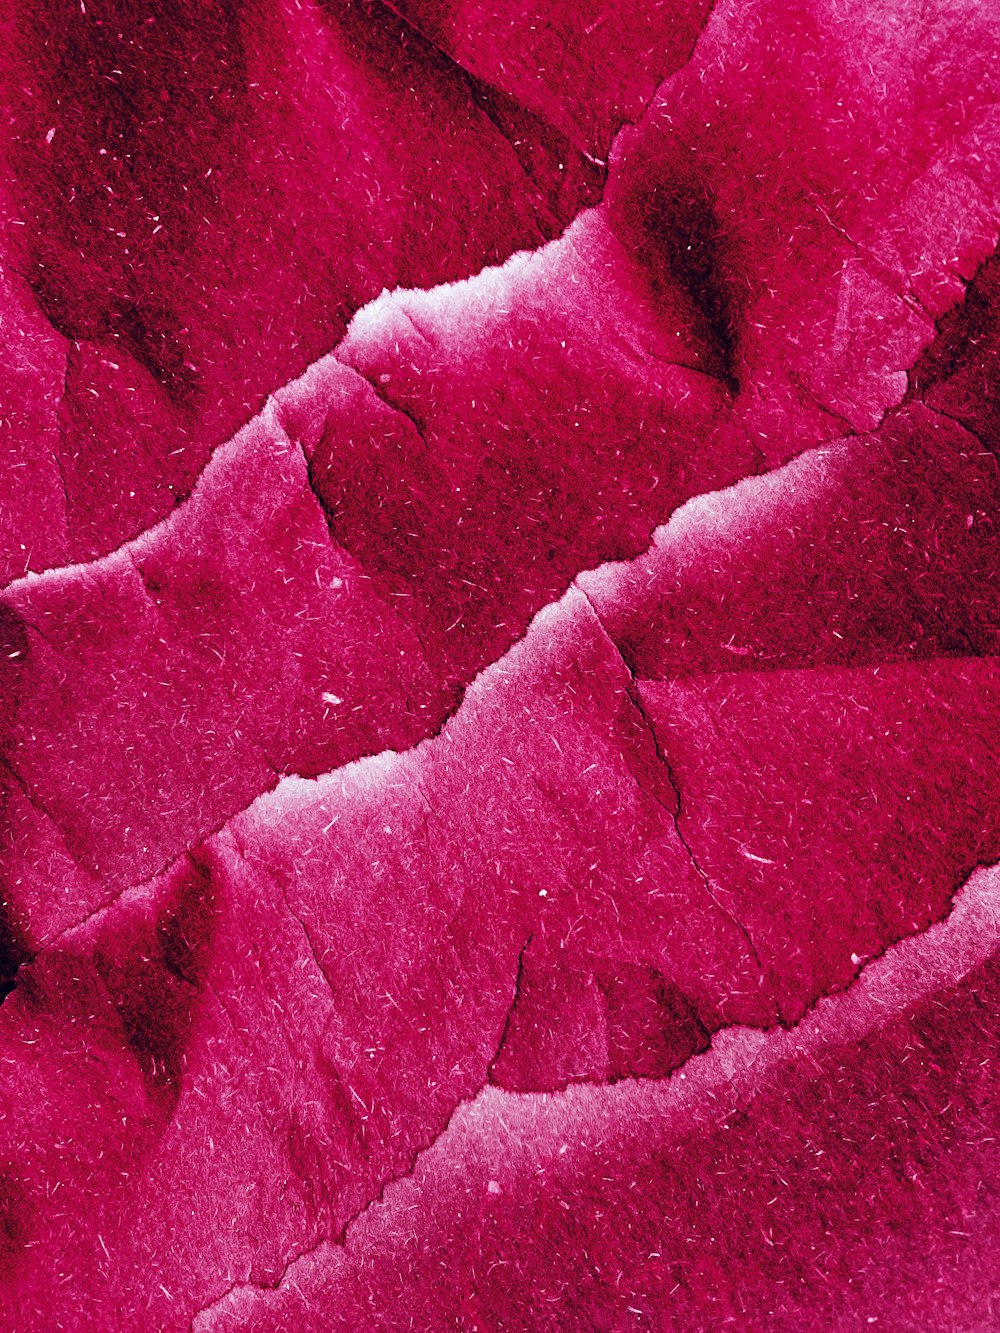 a close up view of a red plant